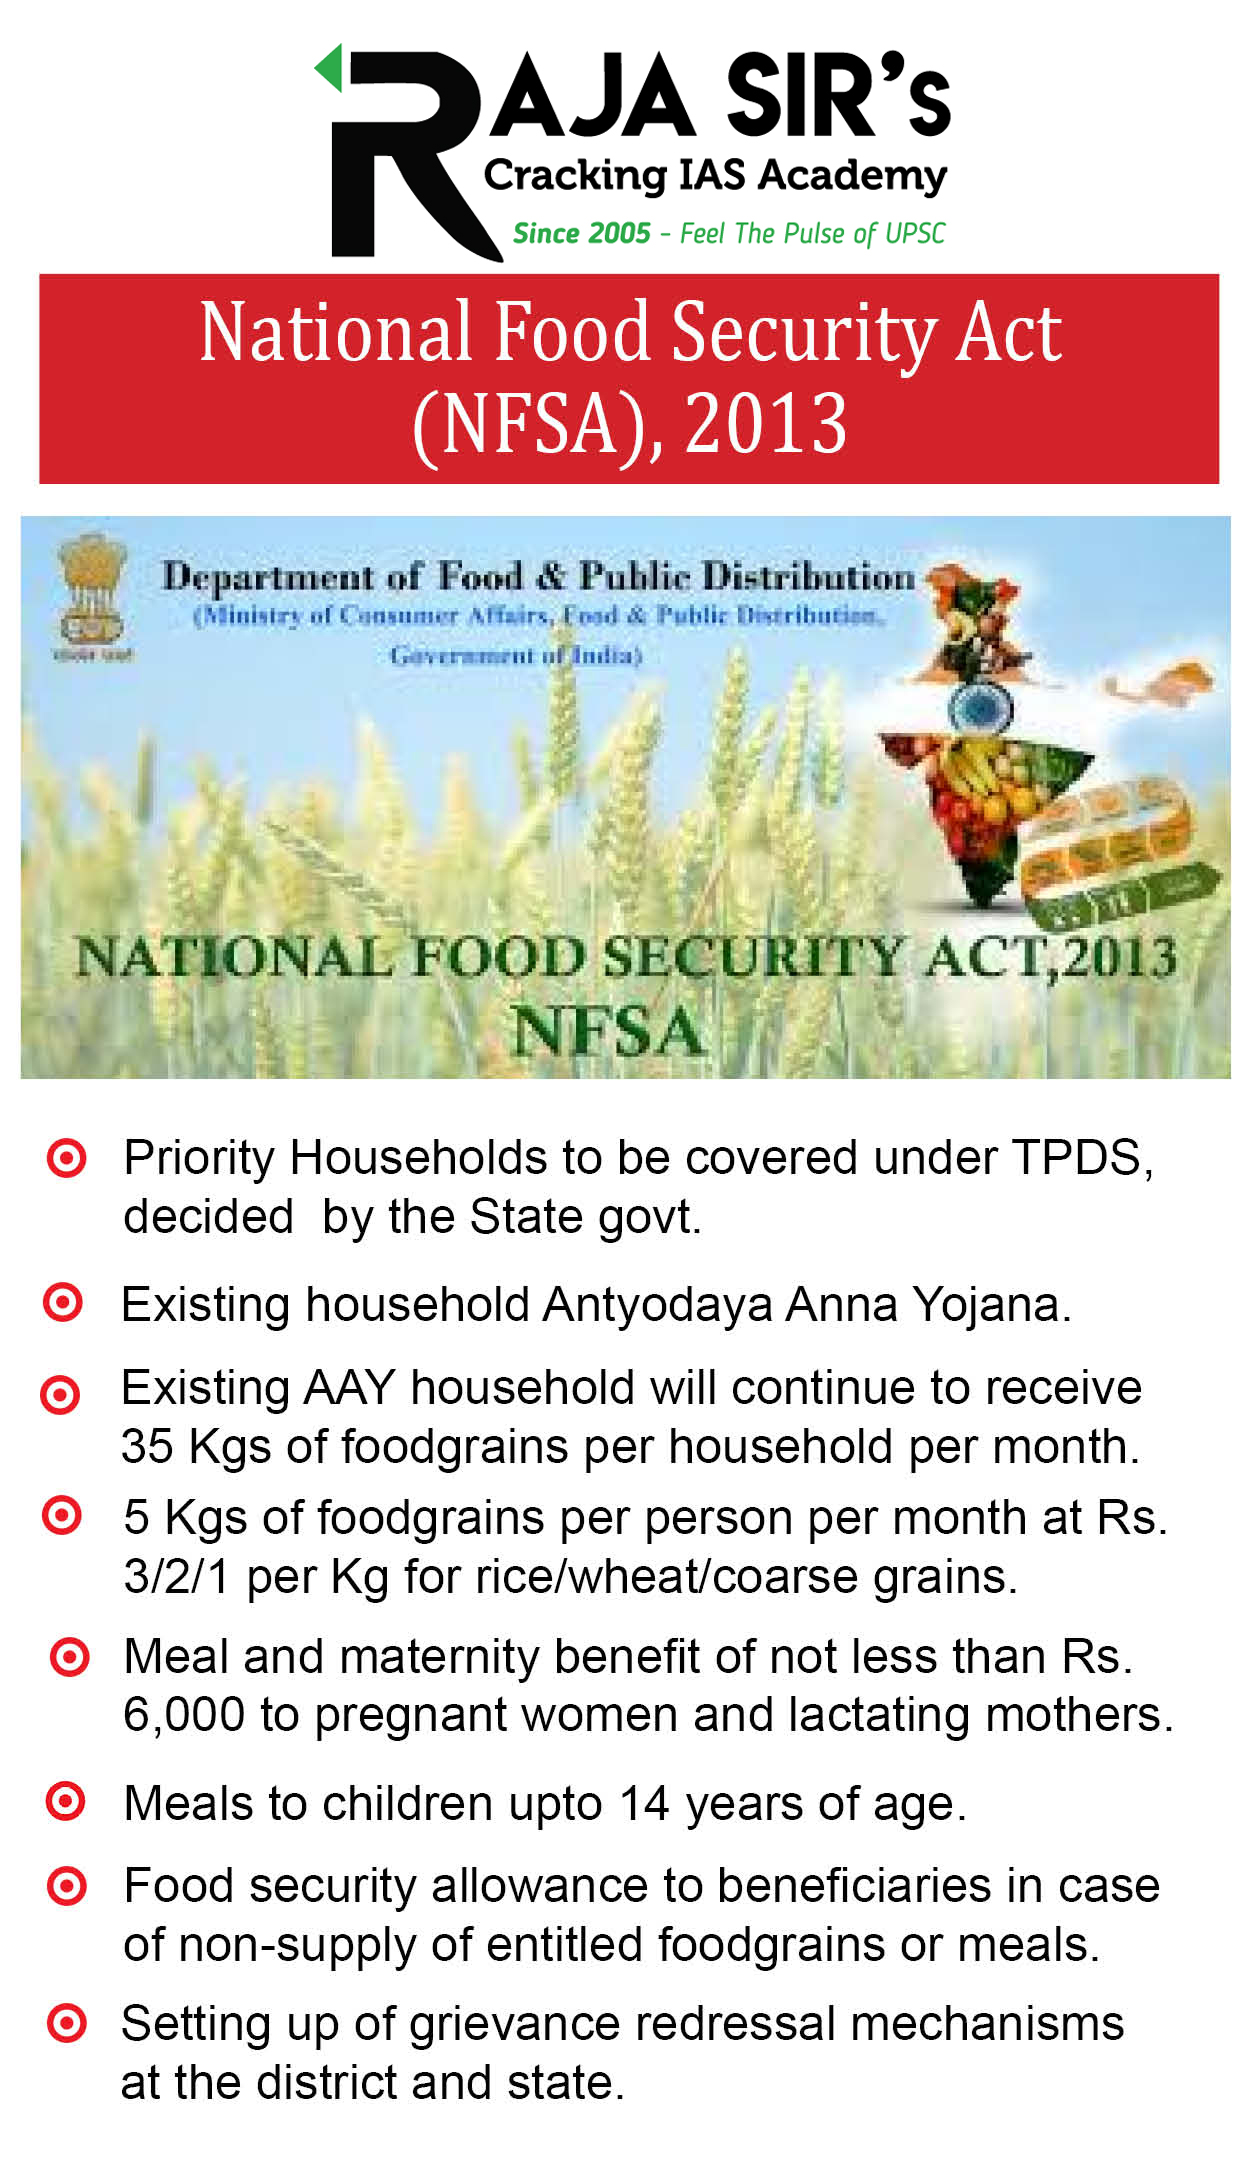 The National Food Security Act (NFSA), 2013, through the Public Distribution System (PDS), provides a crucial safety net for roughly 800 million people. In response to the humanitarian crisis, the Government doubled the entitlements of the 800 million who were already covered by the PDS (from five kilograms per person per month, to 10kg). But that does nothing for those without ration cards. The humanitarian crisis resulting from the COVID-19 lockdown, made it apparent that too many were still excluded from the PDS.